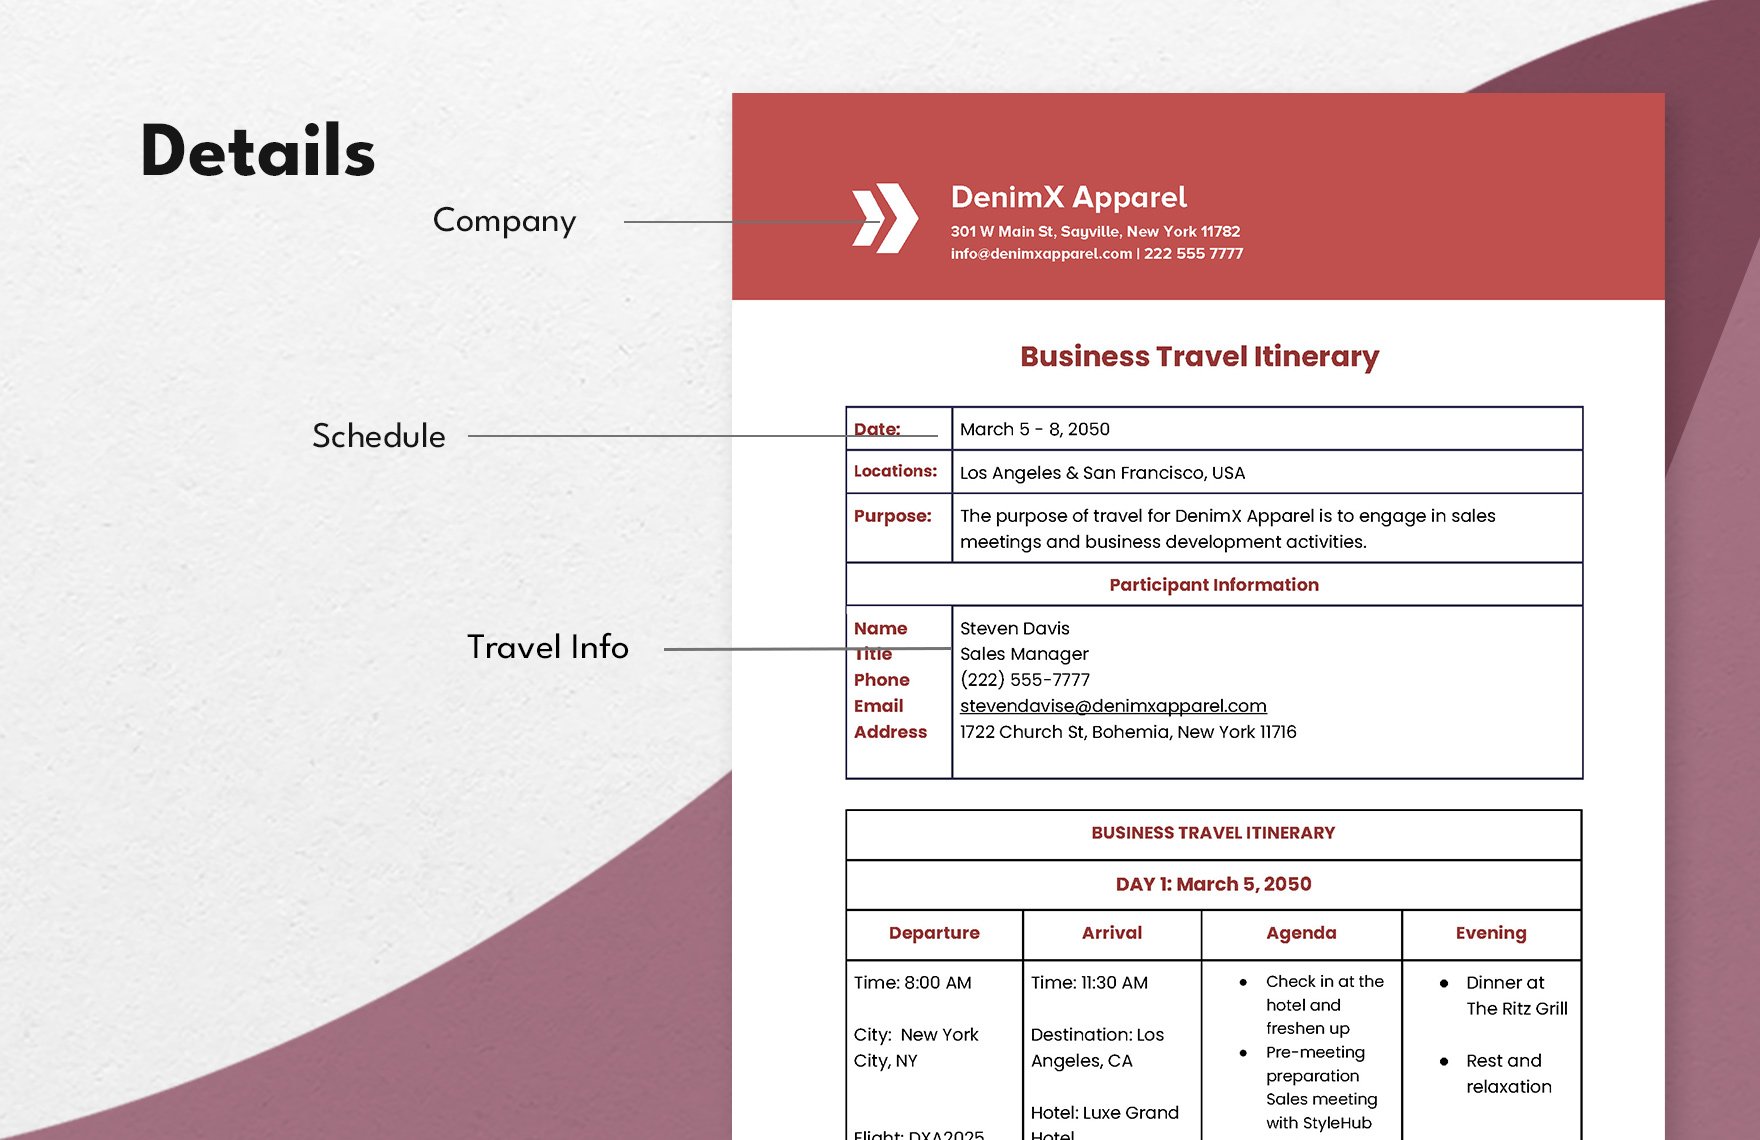 Professional Business Travel Itinerary Template